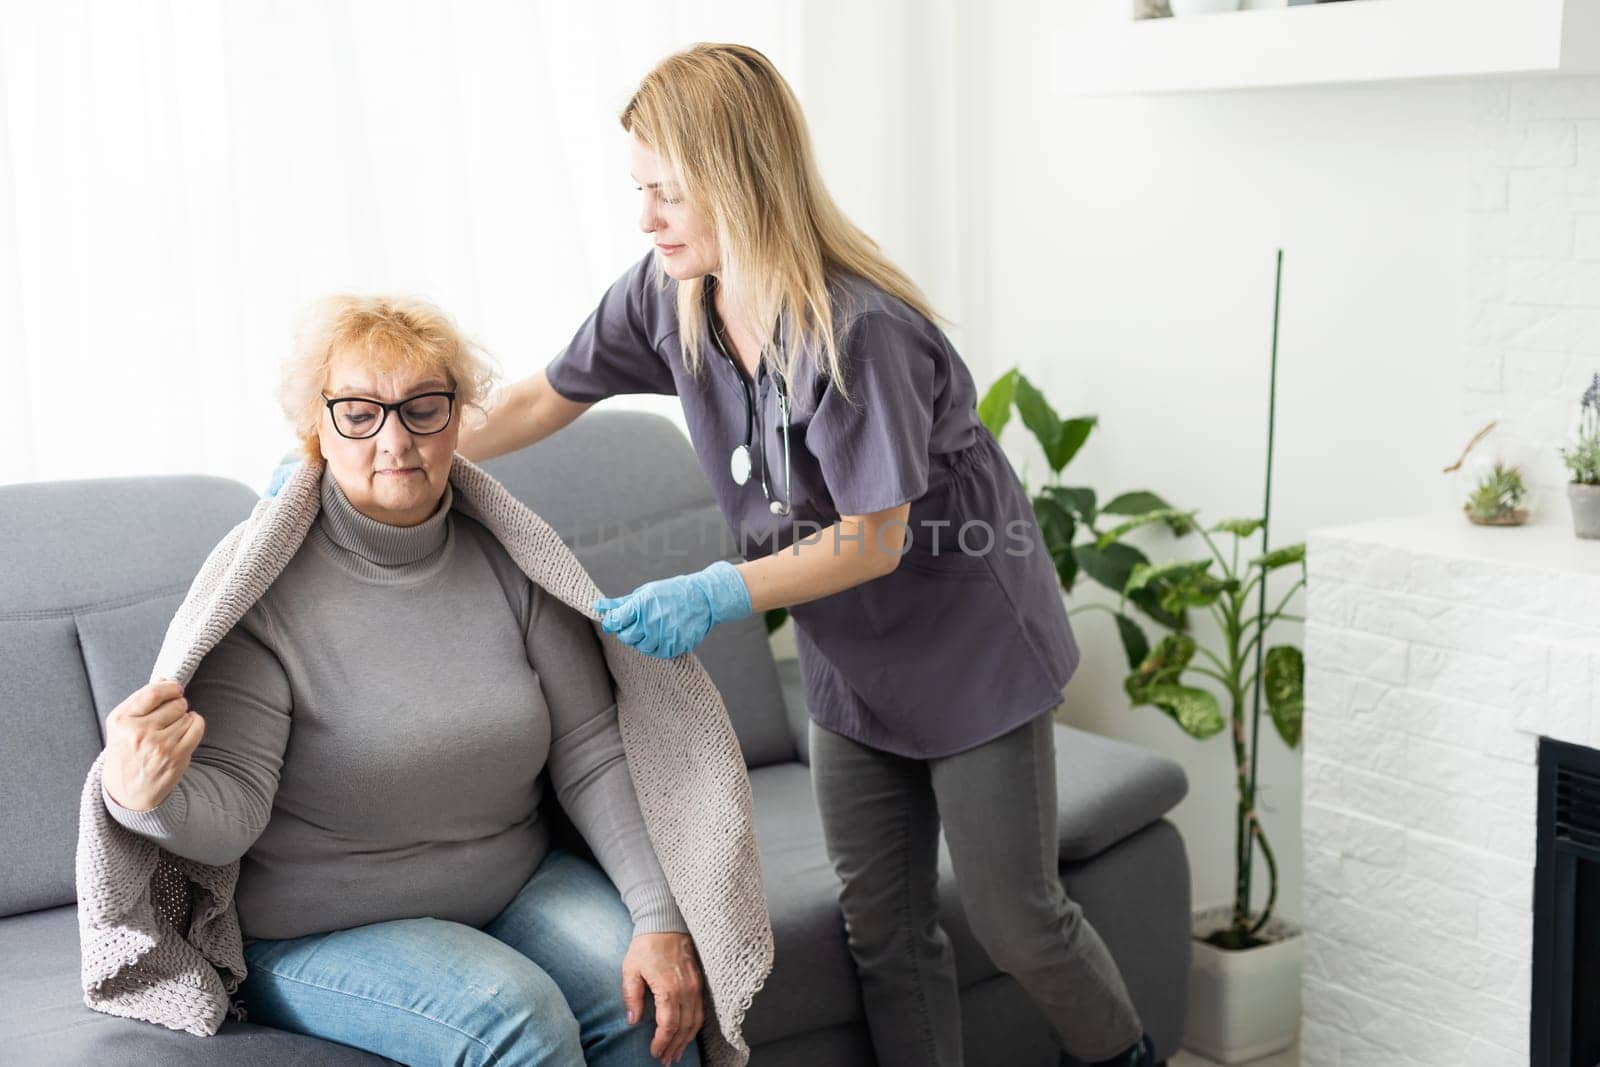 Mature female in elderly care facility gets help from hospital personnel nurse. Senior woman, aged wrinkled skin hands of her care giver. Grand mother everyday life. Background, copy space